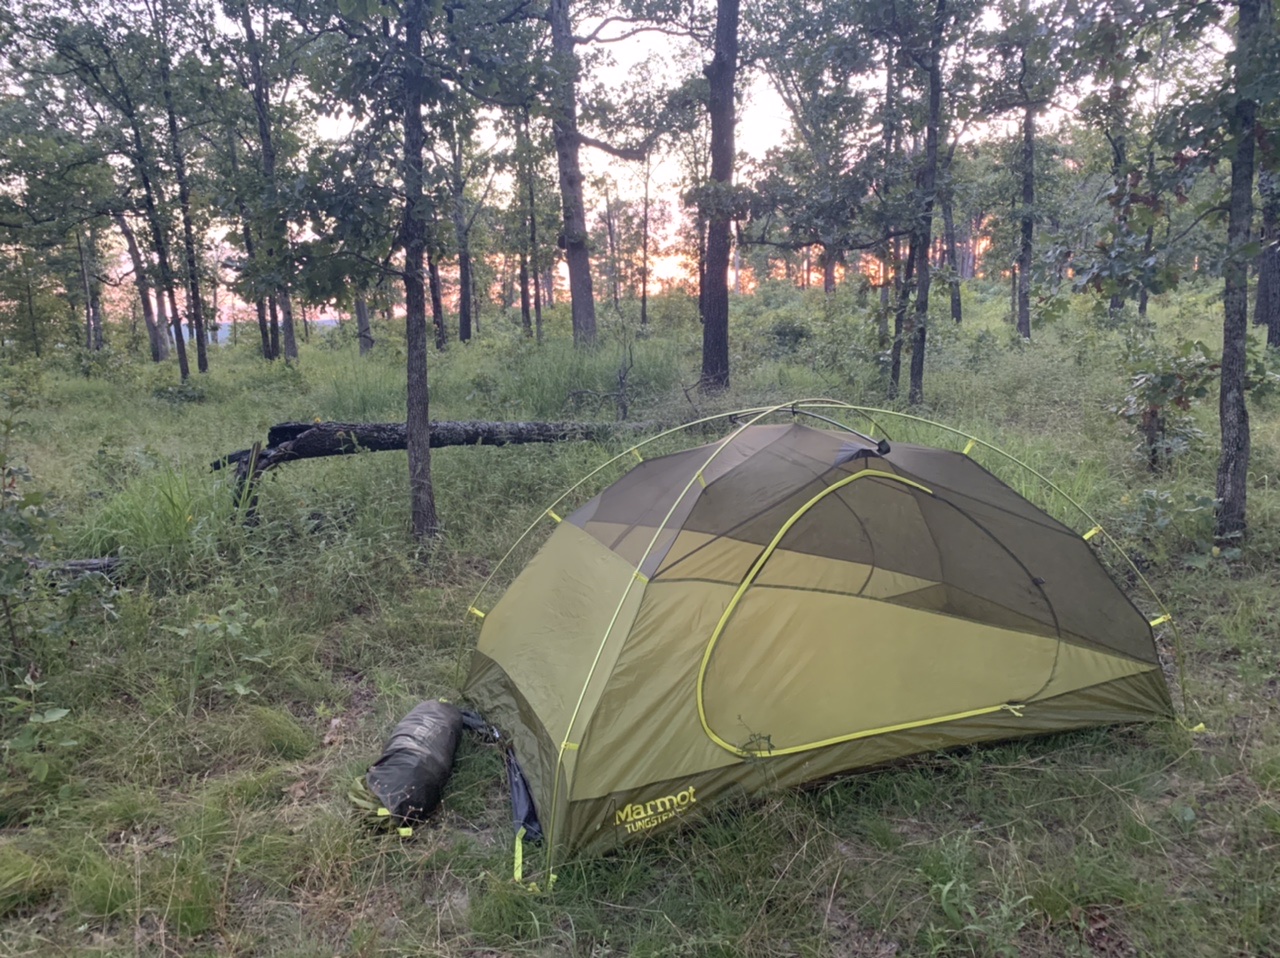 Green marmot tent in foreground with woods and sunset in background